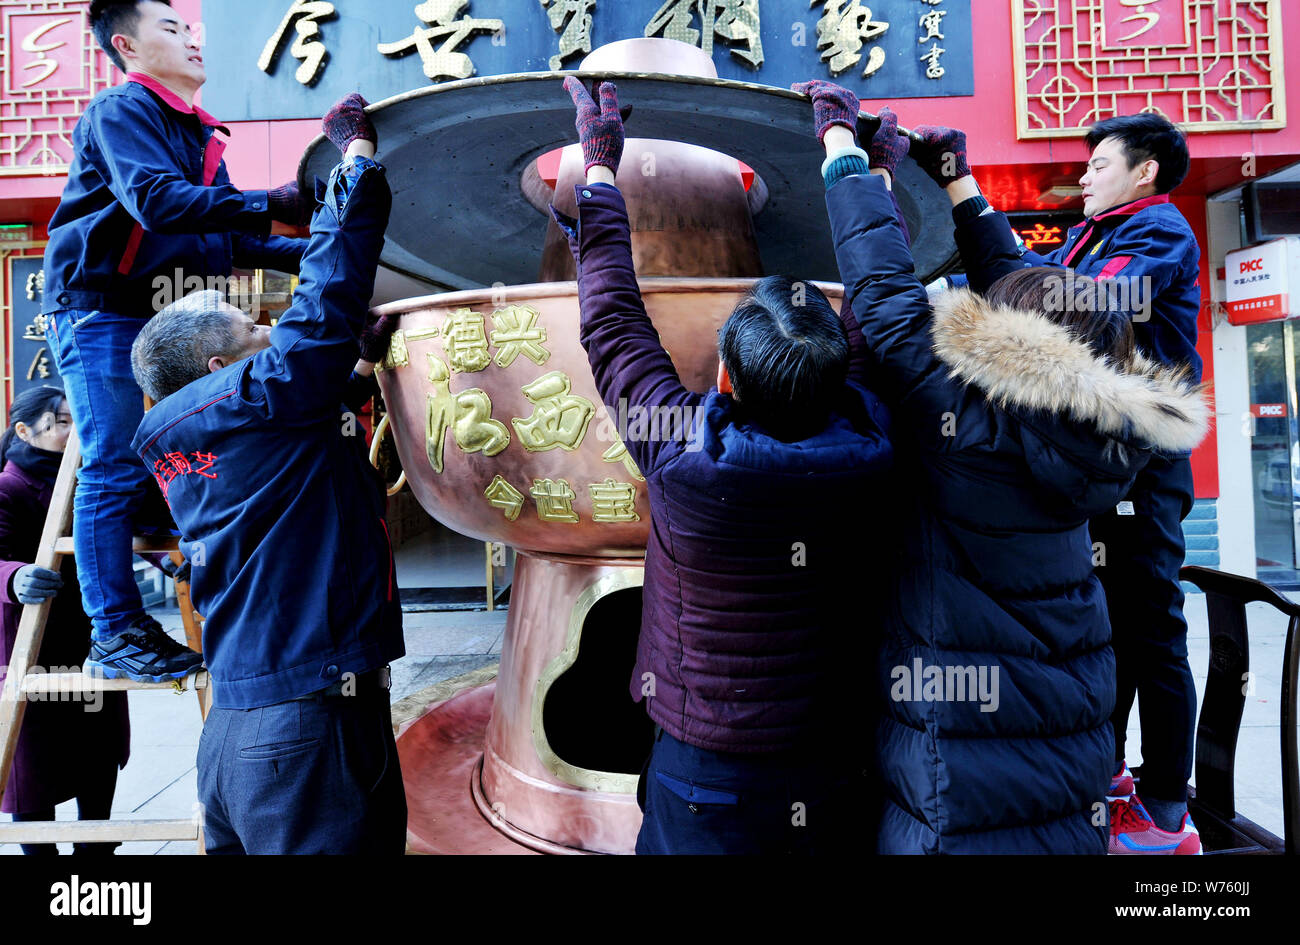 Chinese employees move a huge hotpot weighing over 400 kilograms with a height of 3 meters made of red copper to the front of a store in Dexing city, Stock Photo